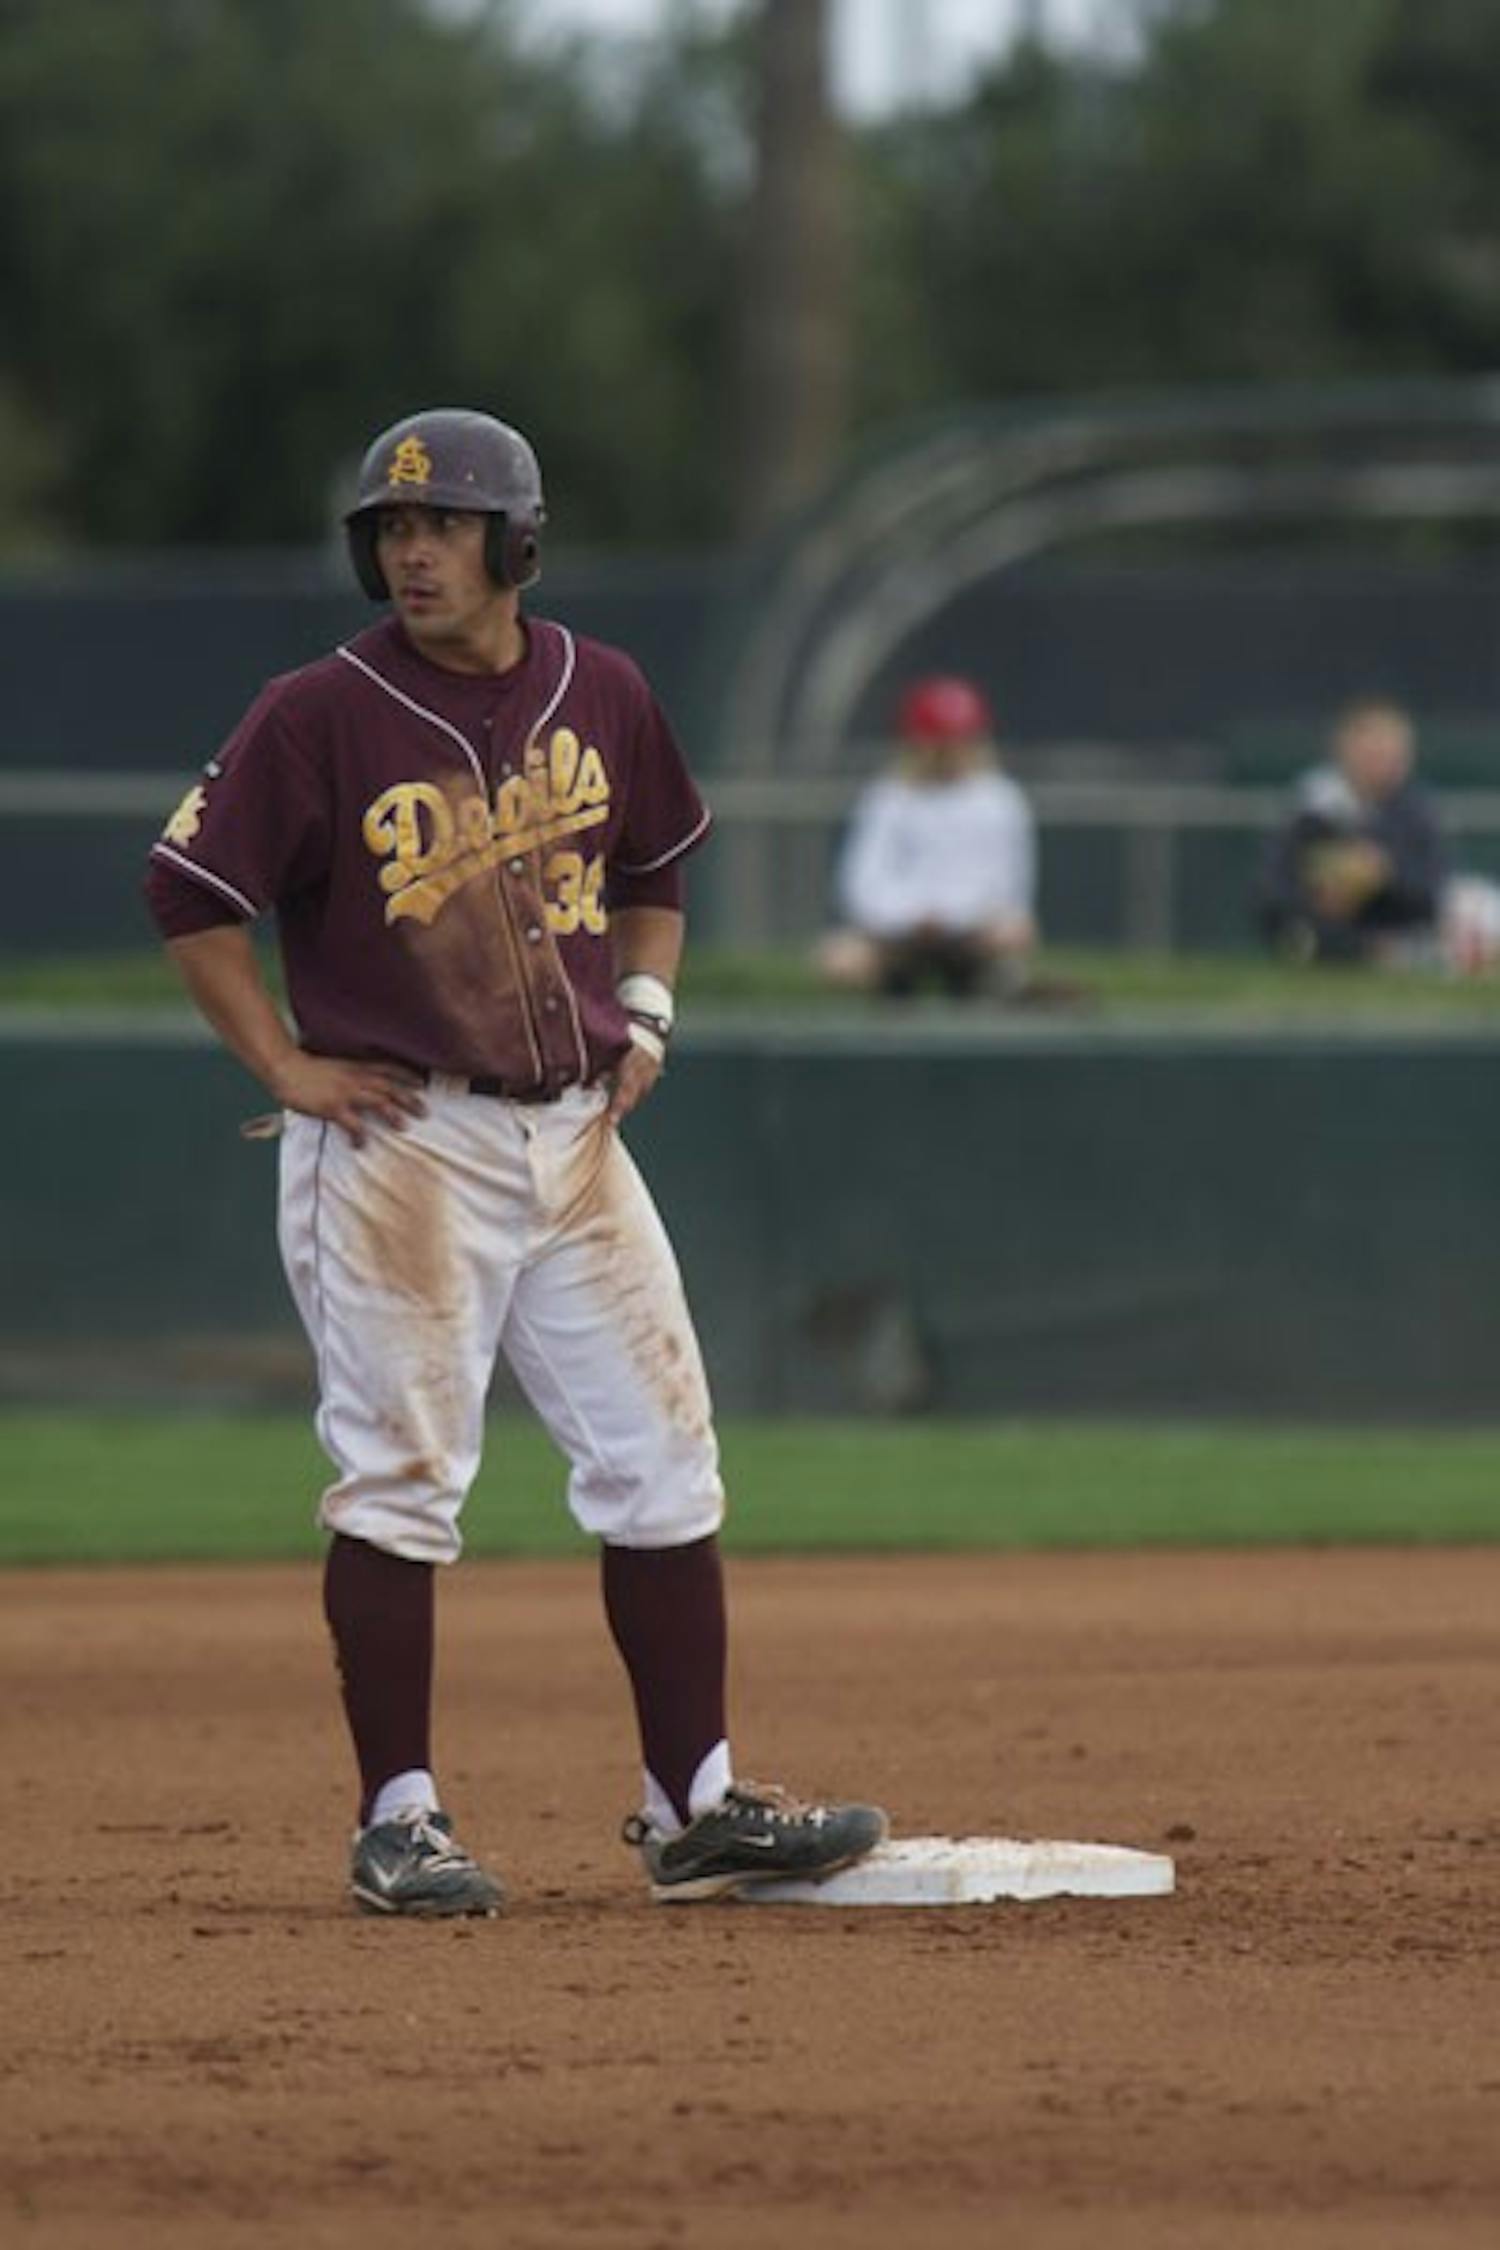 Schedule Strength: ASU junior infielder Riccio Torrez stands on second base during the Sun Devils’ game against Delaware on Feb. 26. ASU sits atop the Pac-10 rankings after winning two out of three games against UA this past weekend. (Photo by Scott Stuk)